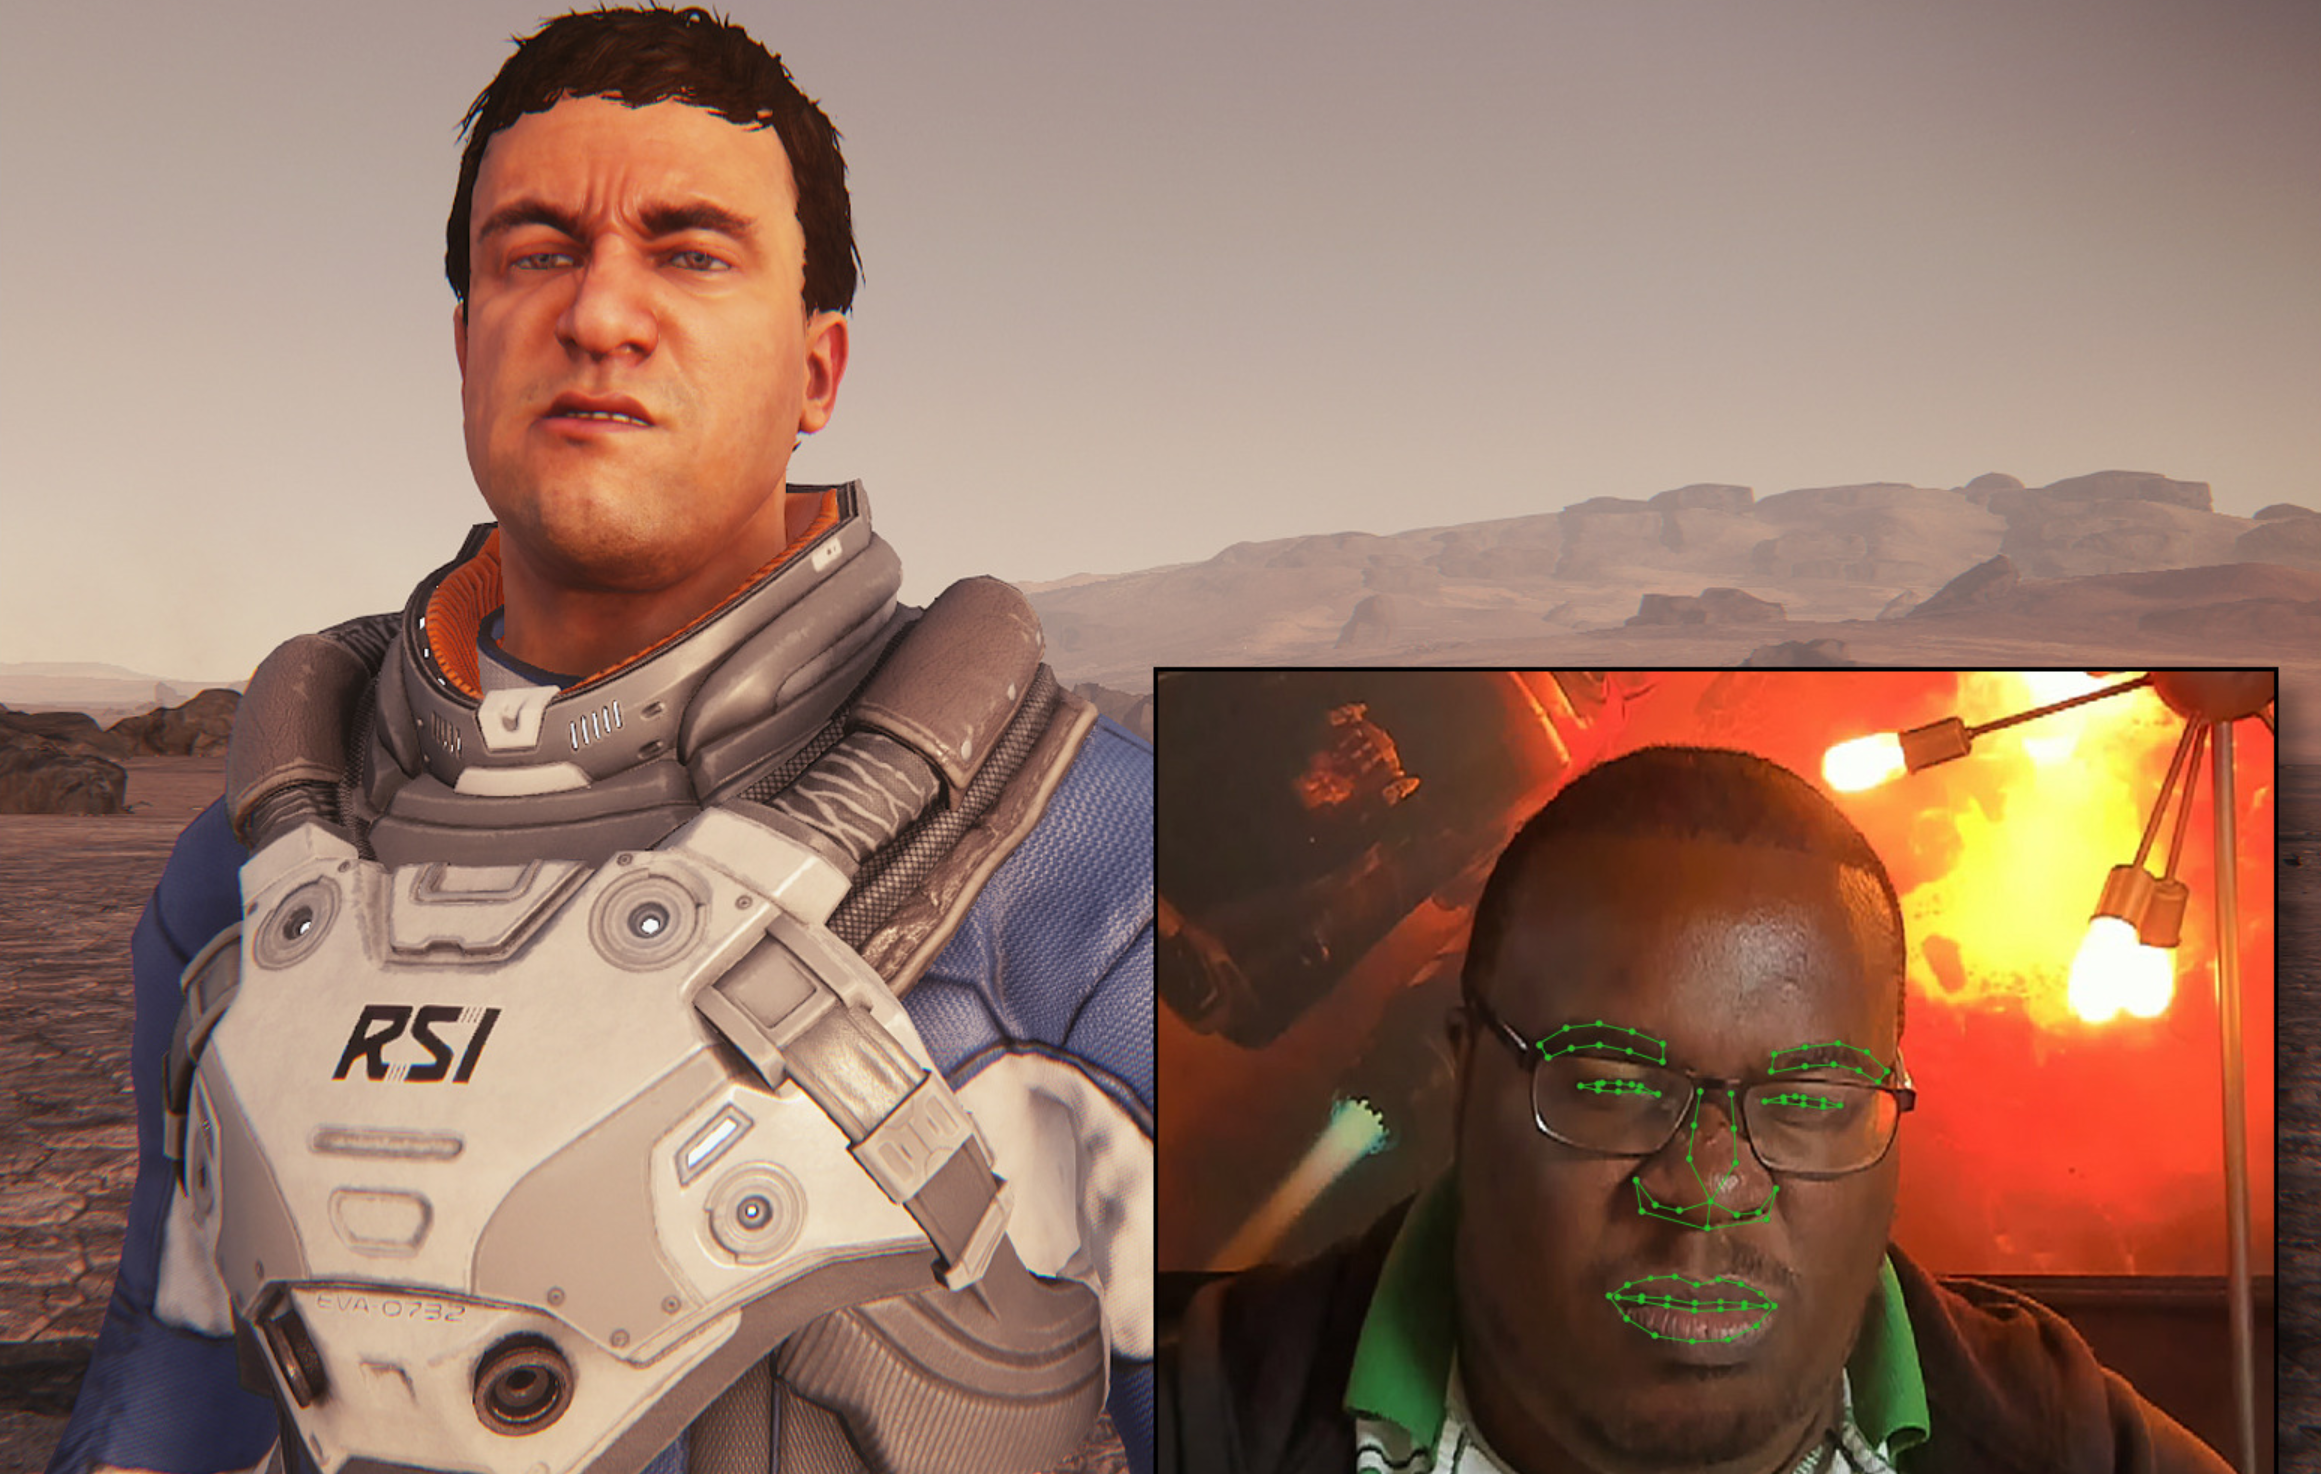 Image for Star Citizen alpha 3.3 lets your character mimic your facial expressions through your webcam, improves frame rate by up to 100%